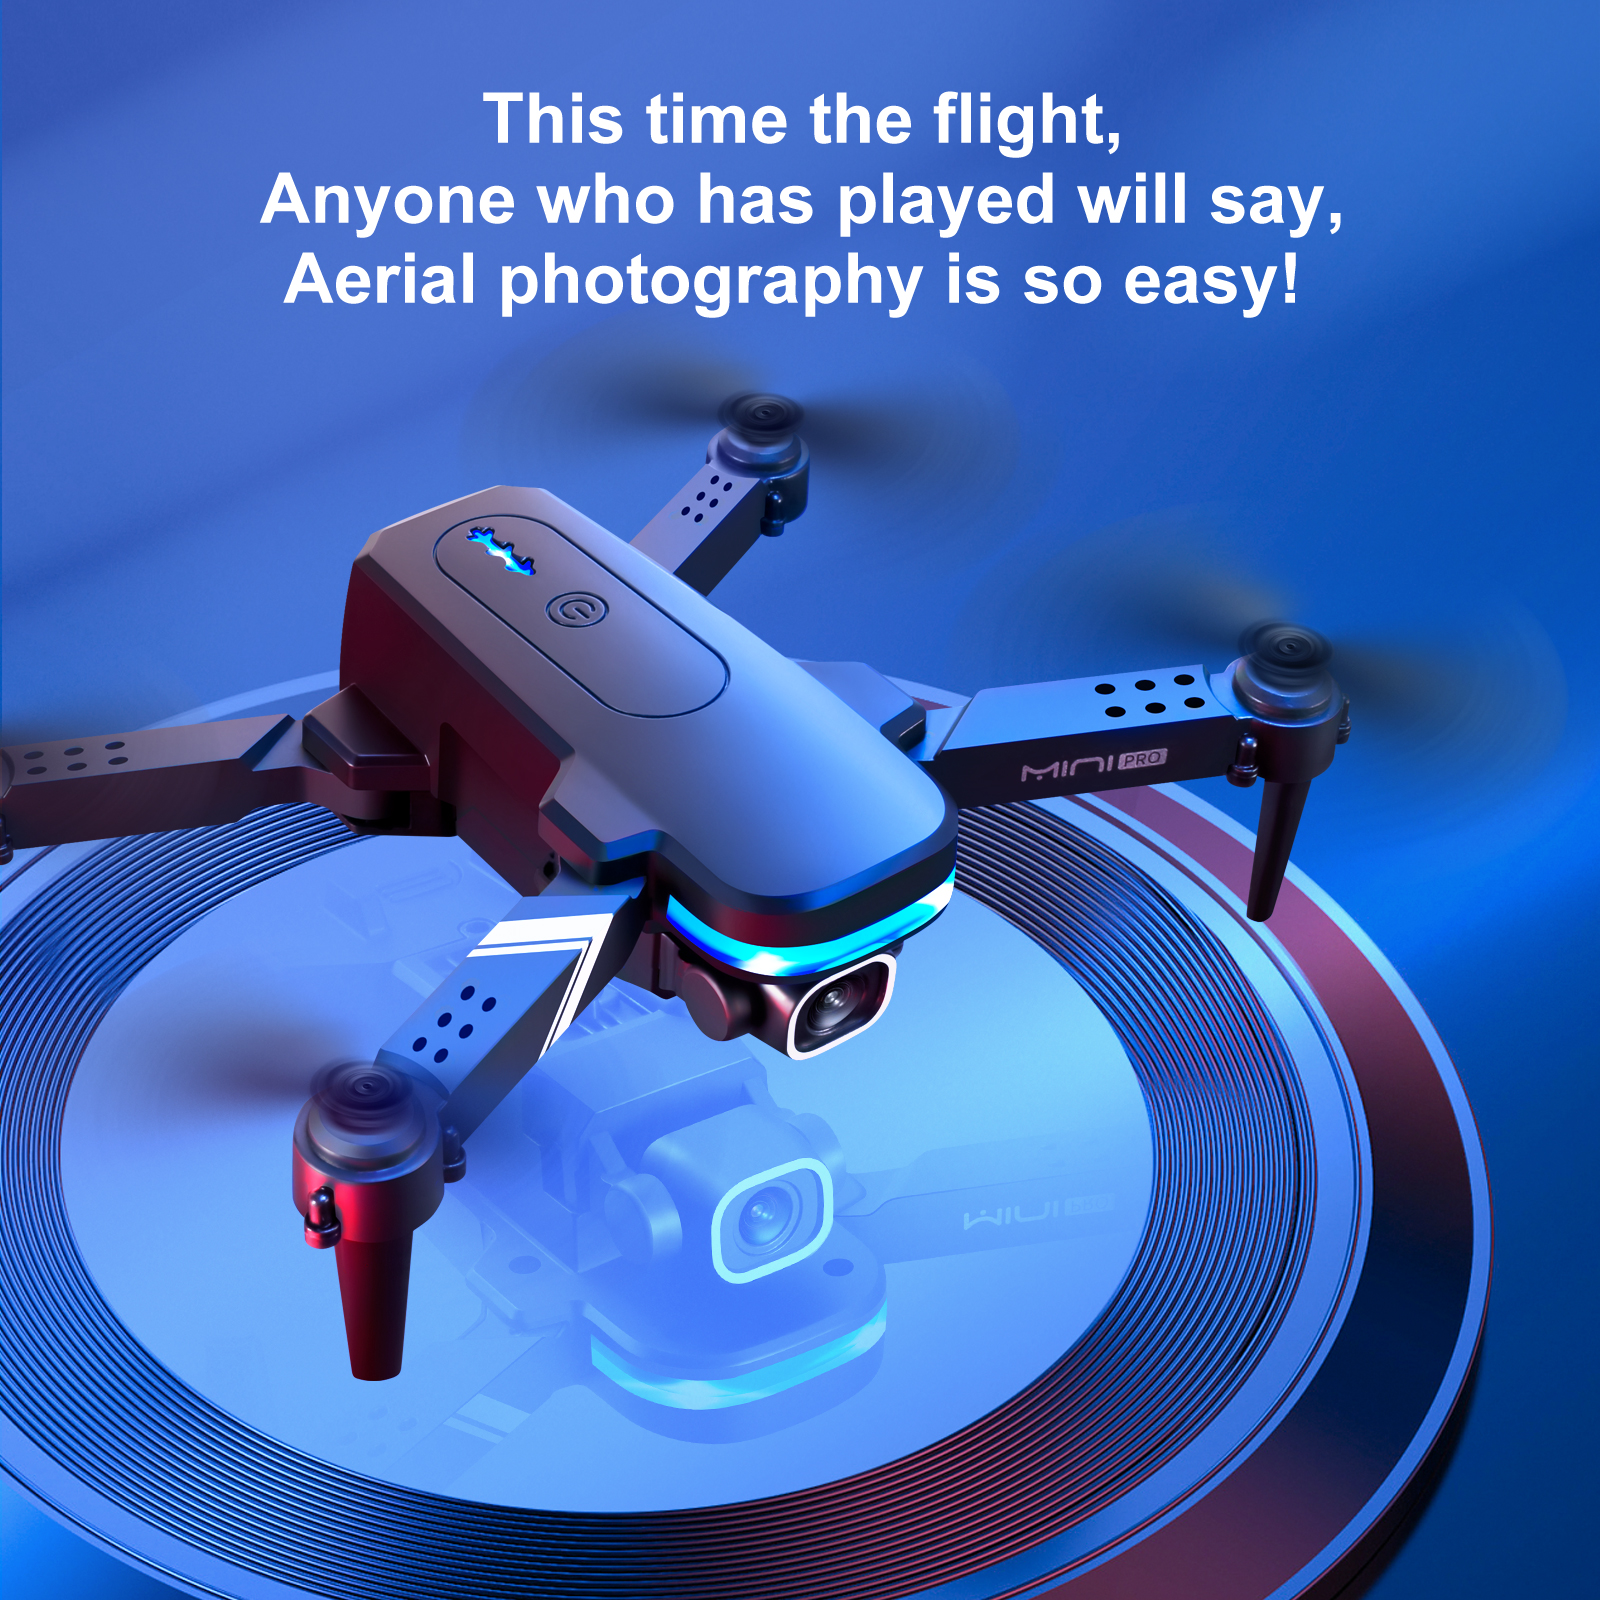 KY910-Mini-WiFi-FPV-with-4K-HD-Dual-50x-ZOOM-Camera-Altitude-Hold-Mode-Gravity-Control-Foldable-RC-D-1902386-6